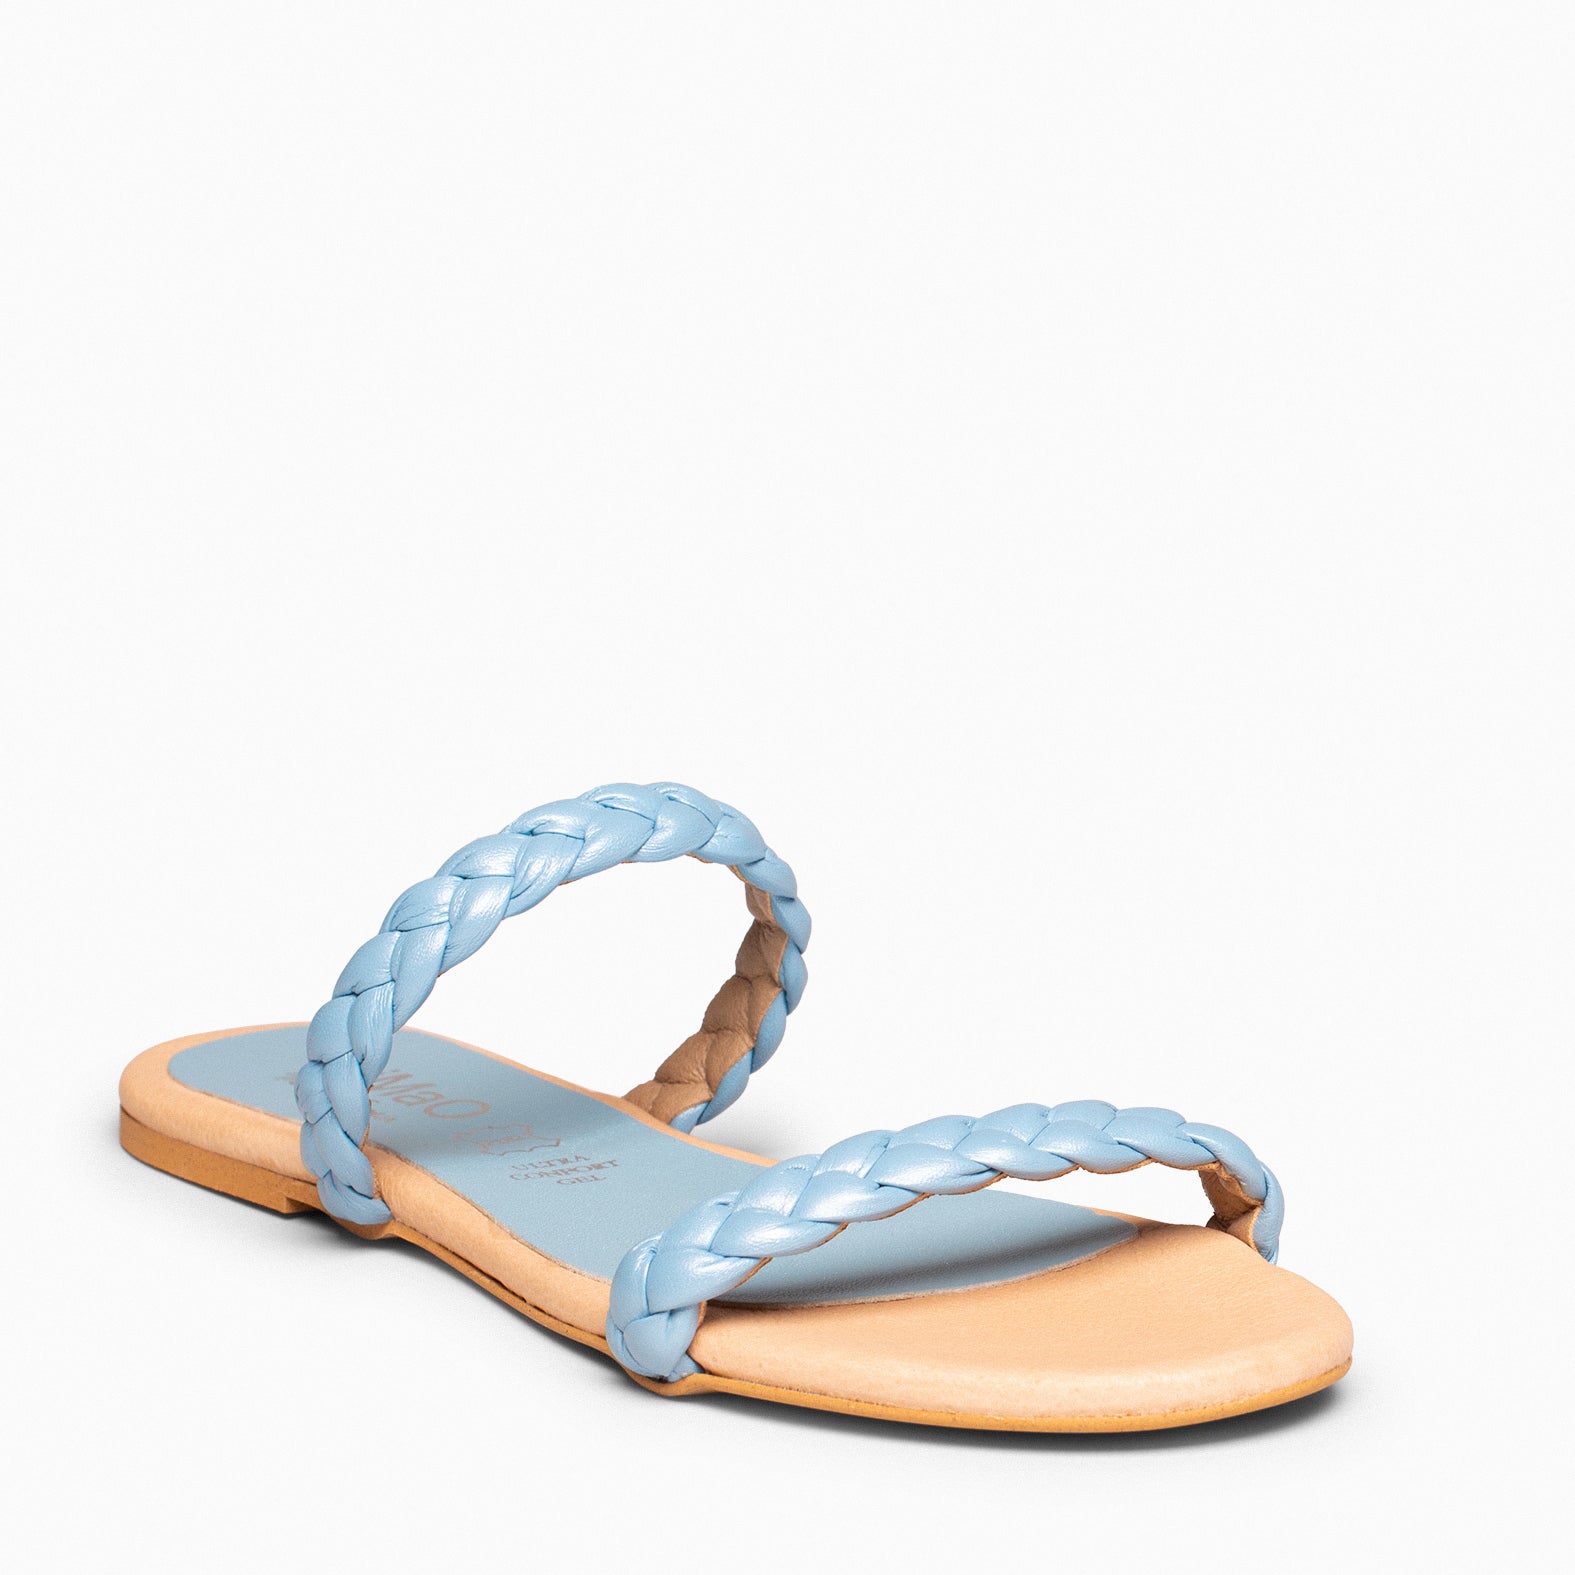 DAILY – BLUE FLAT SANDAL WITH BRAIDS